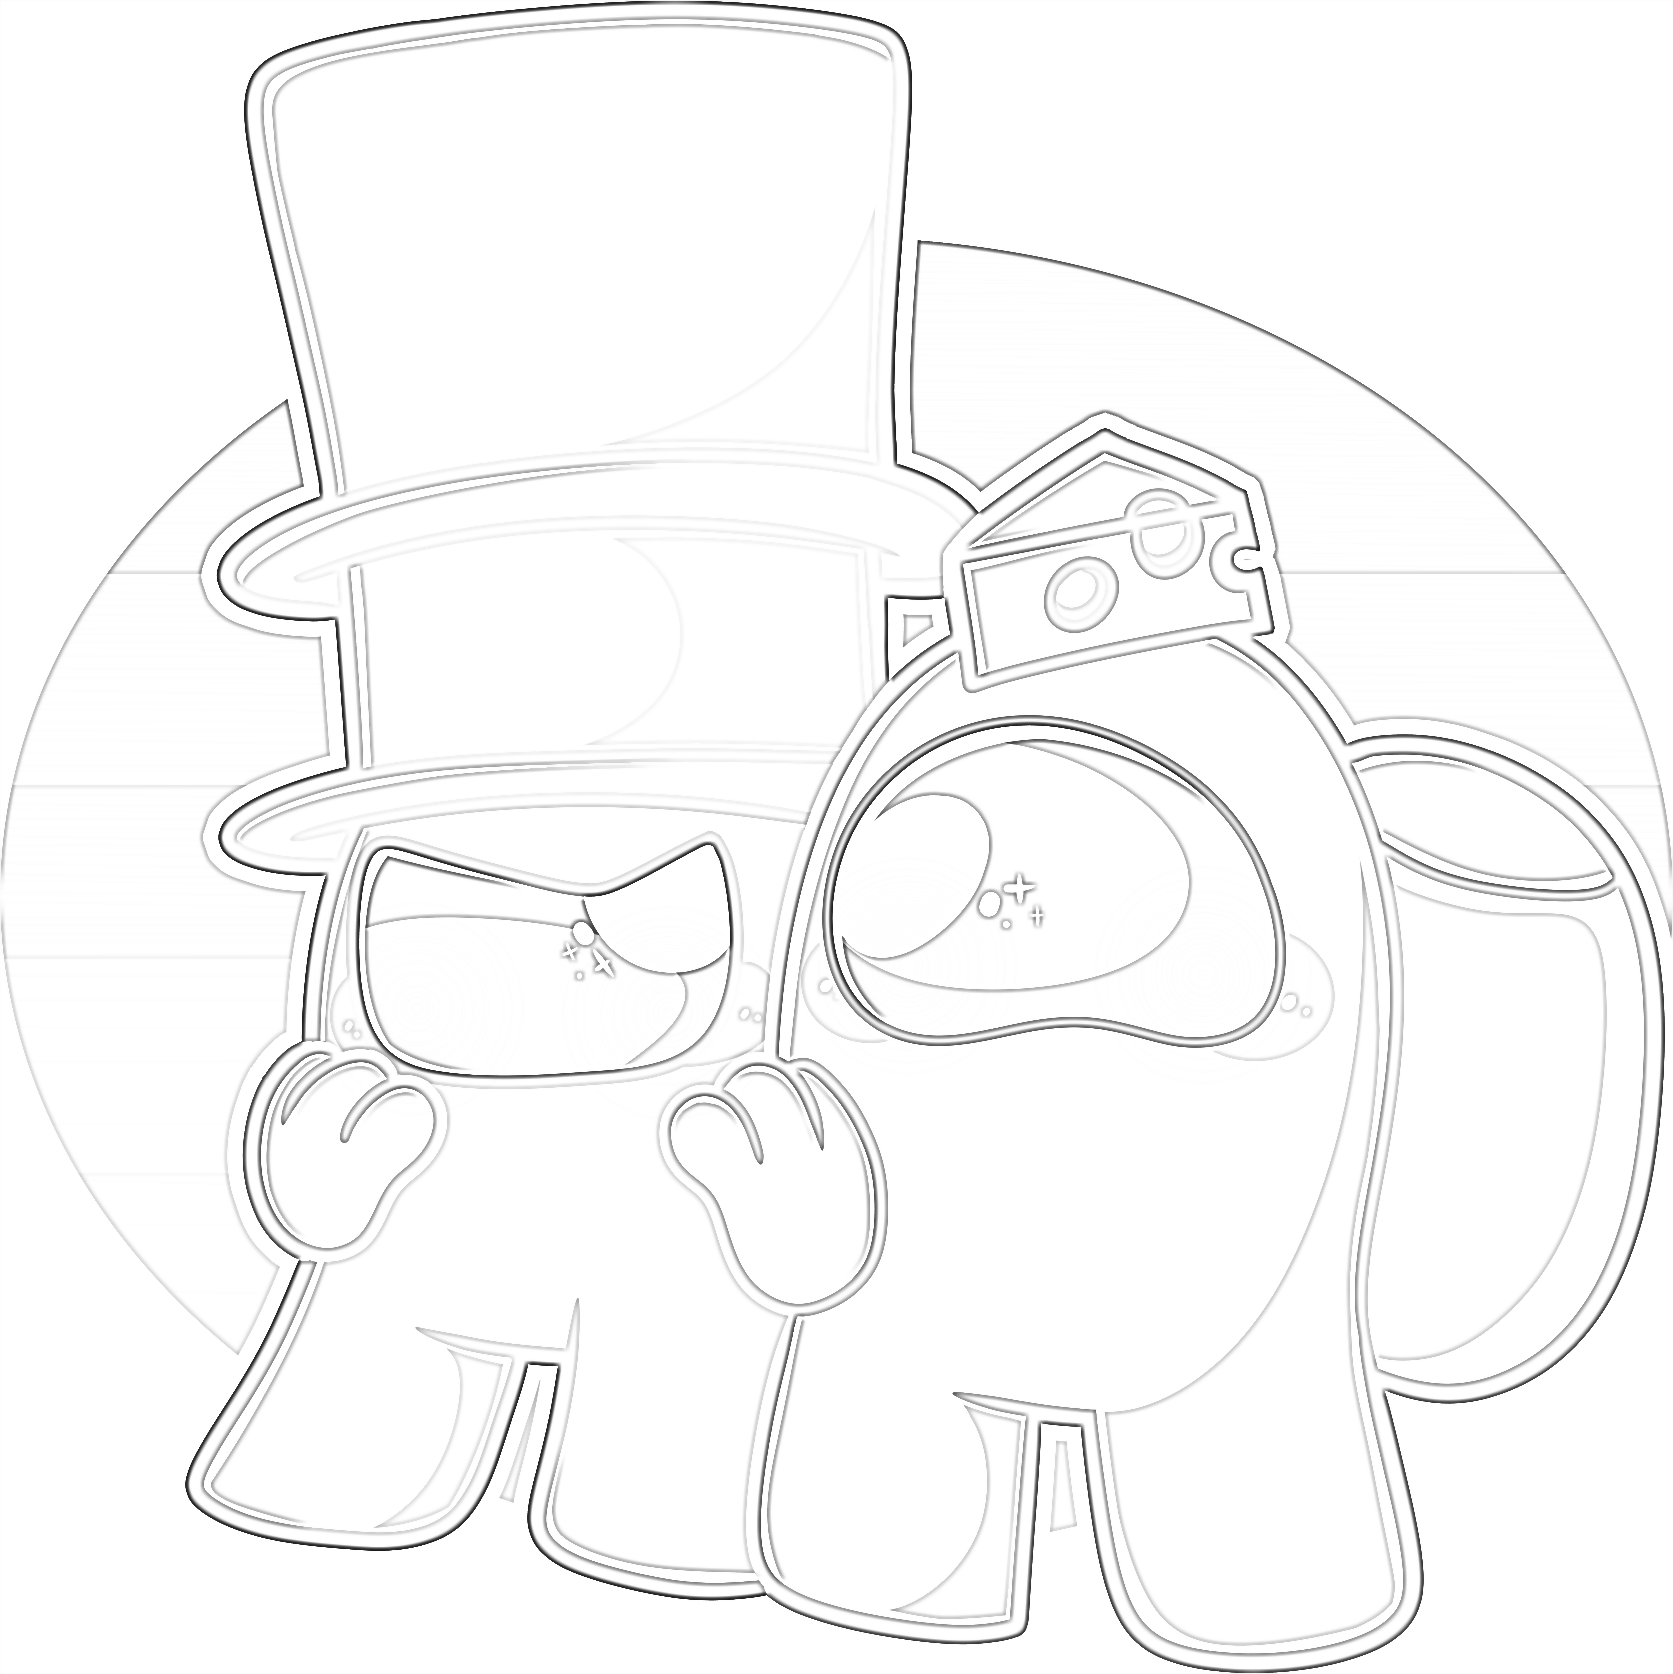 Gentleman and Mr Cheese - Coloring page